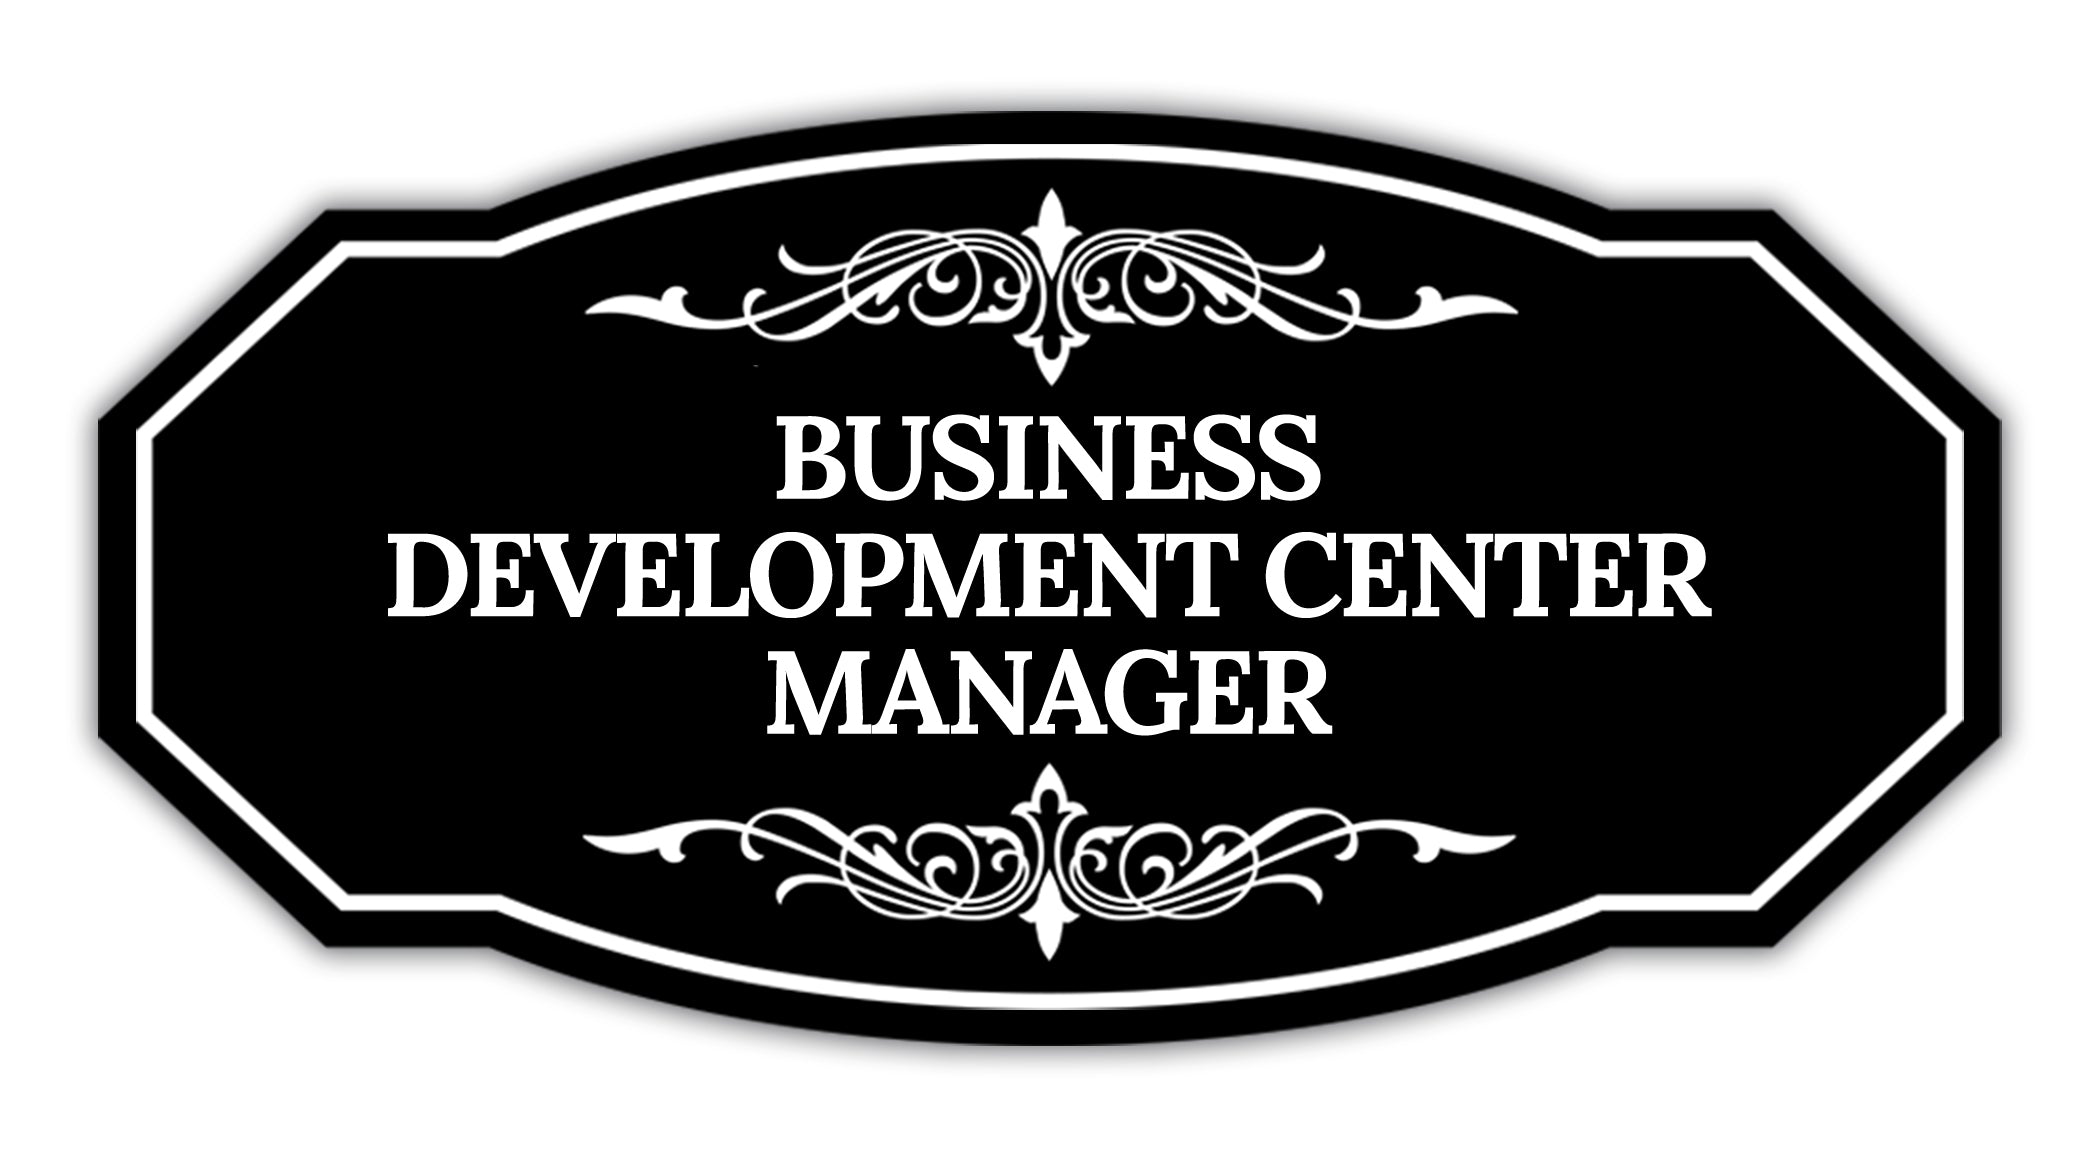 Signs ByLITA Victorian Business Development Center Manager Graphic Wall or Door Sign